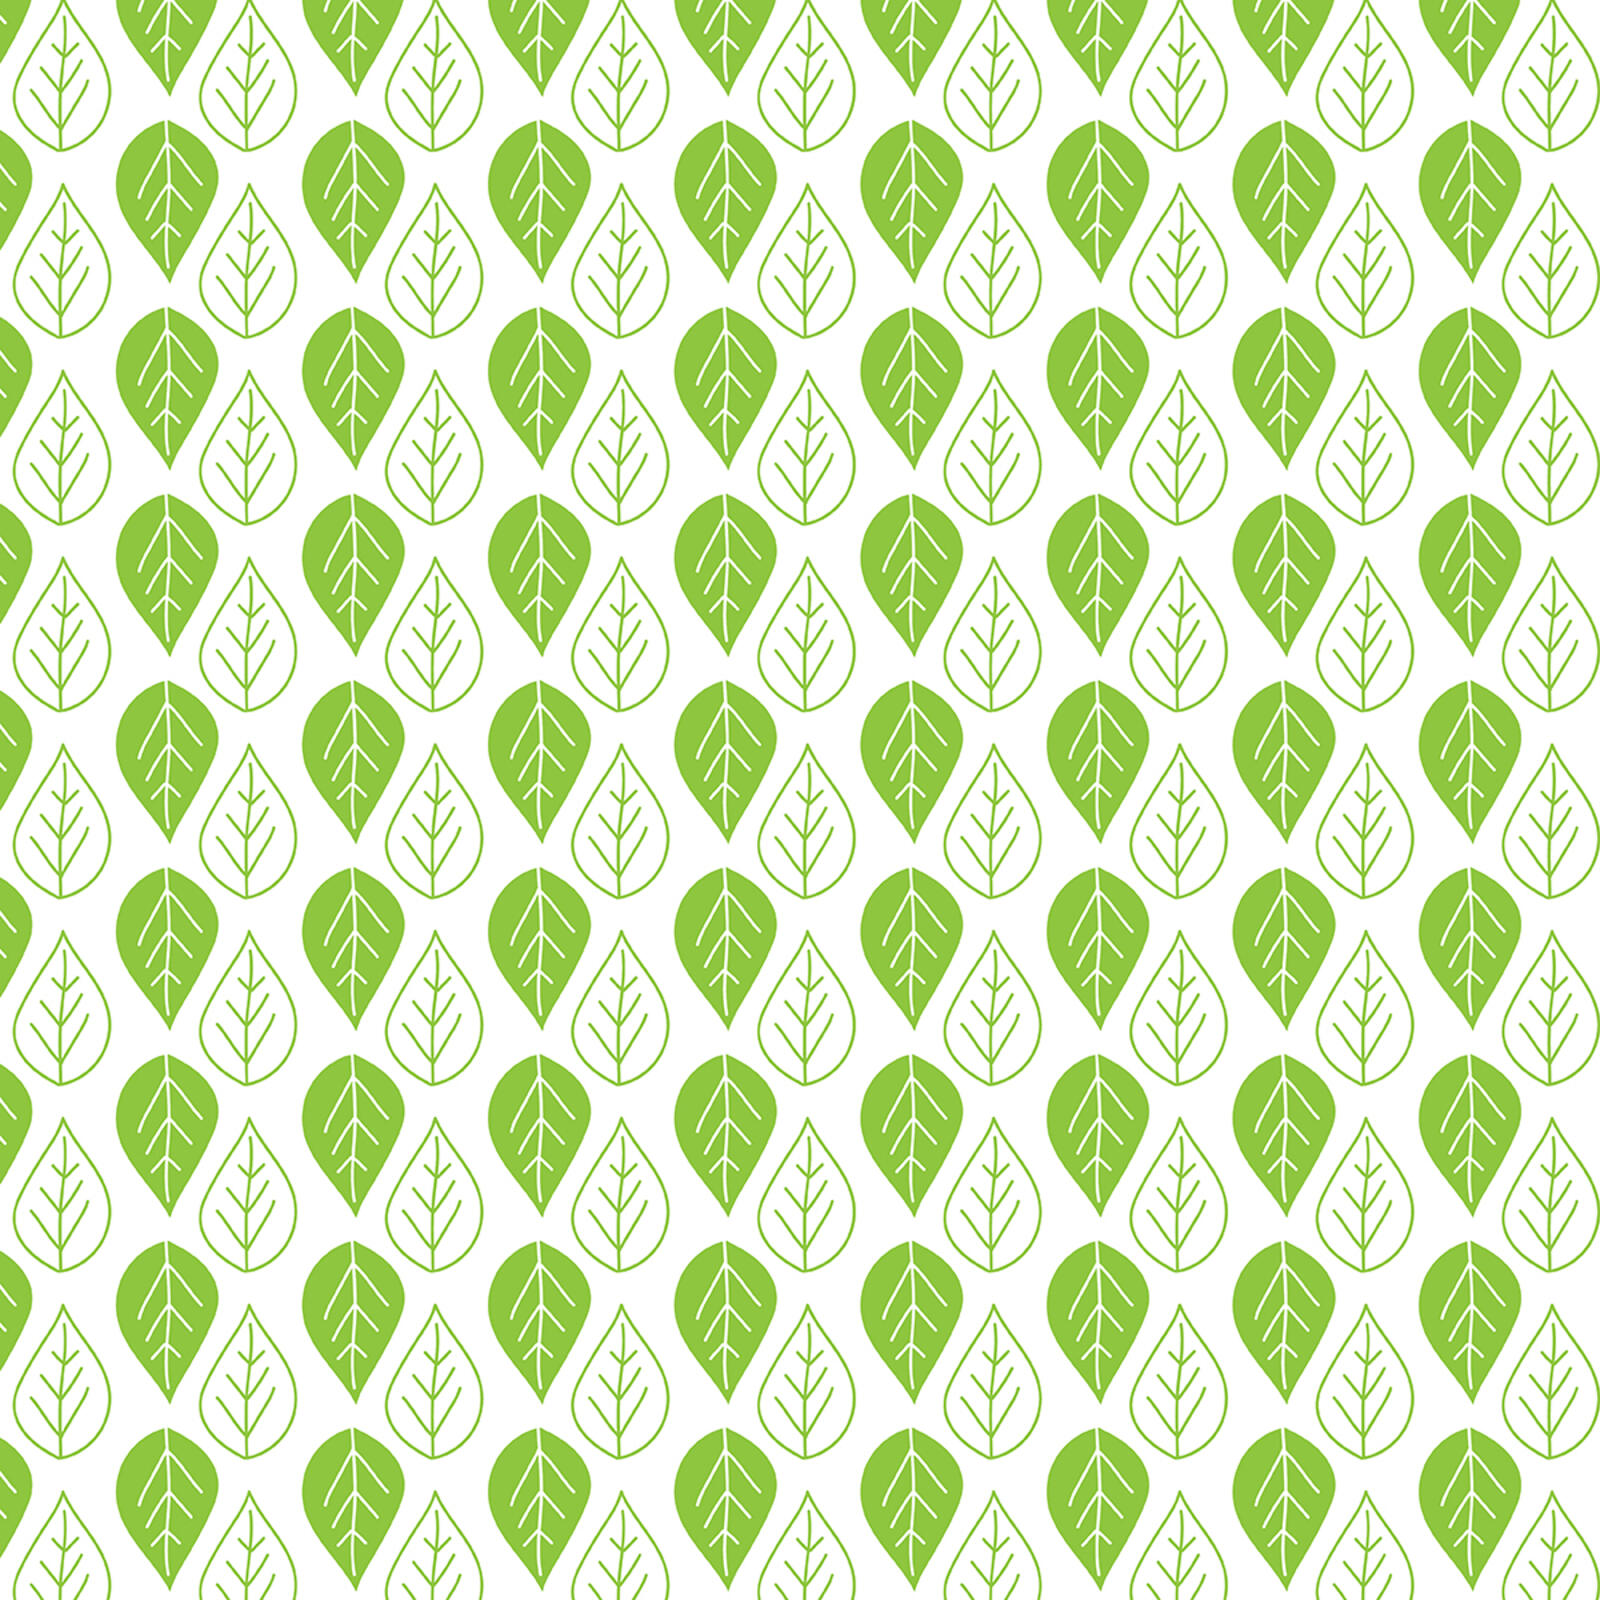 Wallpapers leaves pattern textures on the desktop